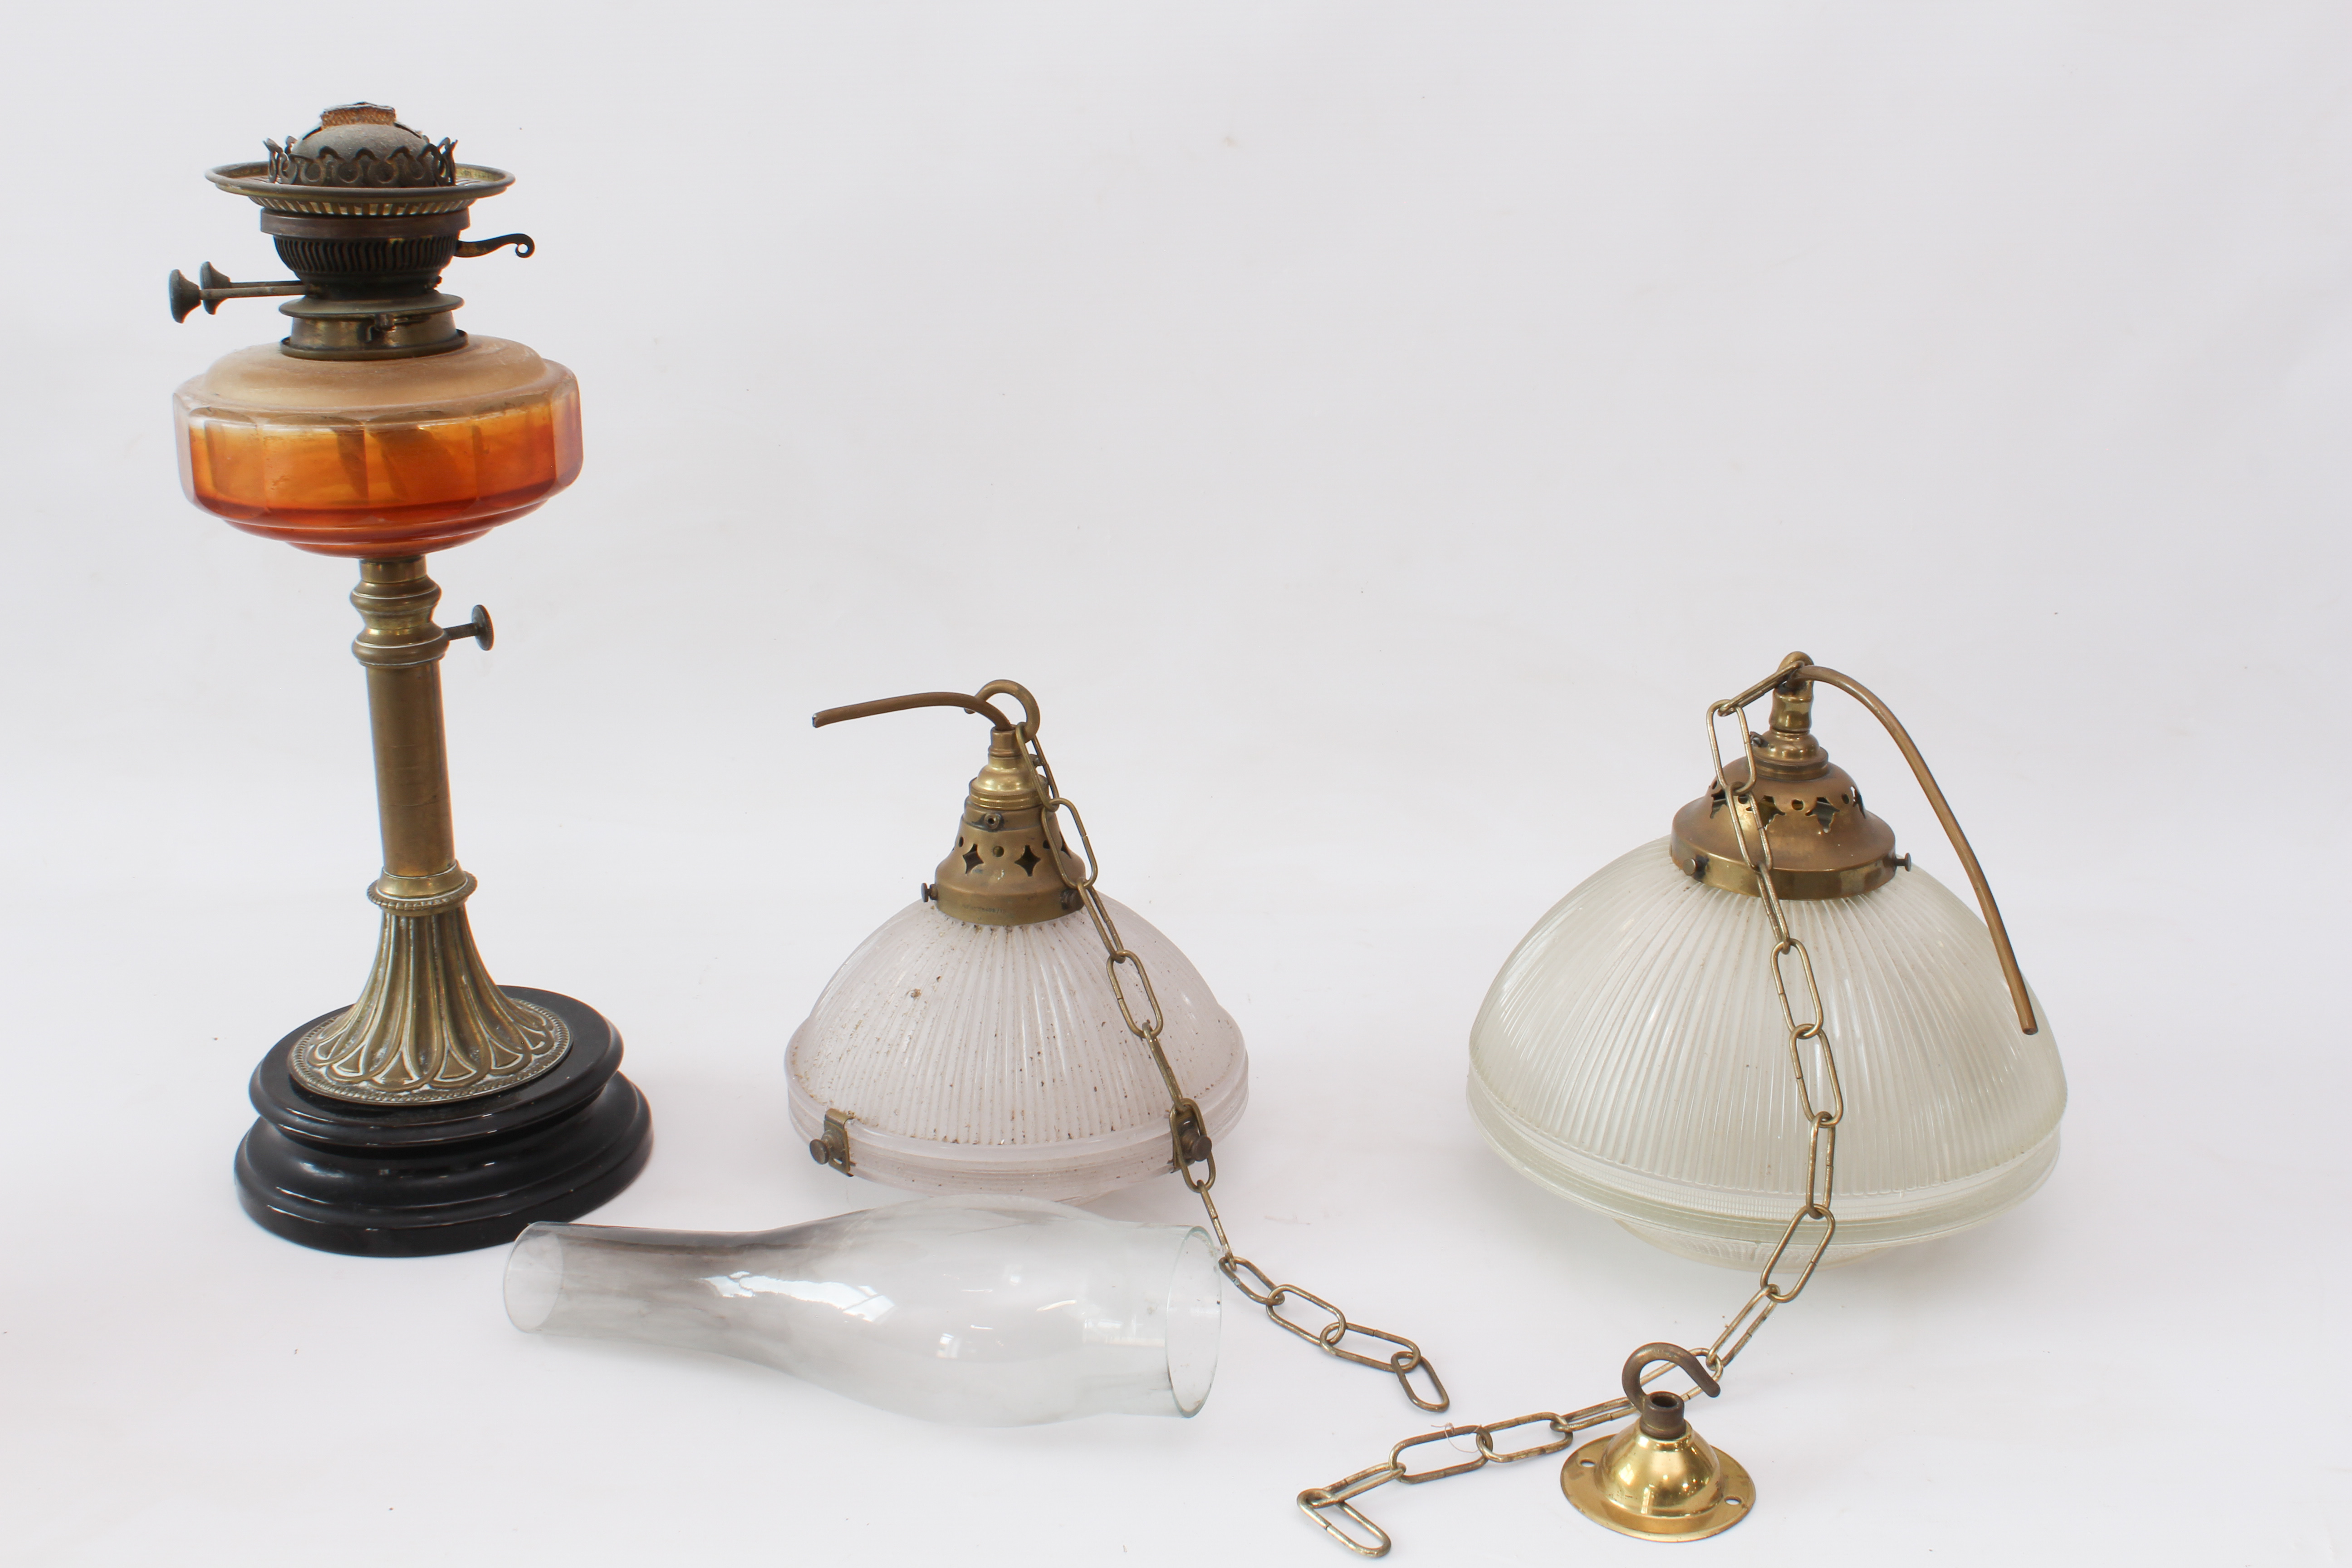 A graduated pair of glass and brass celling lights and an oil lamp - the ceiling lights with moulded